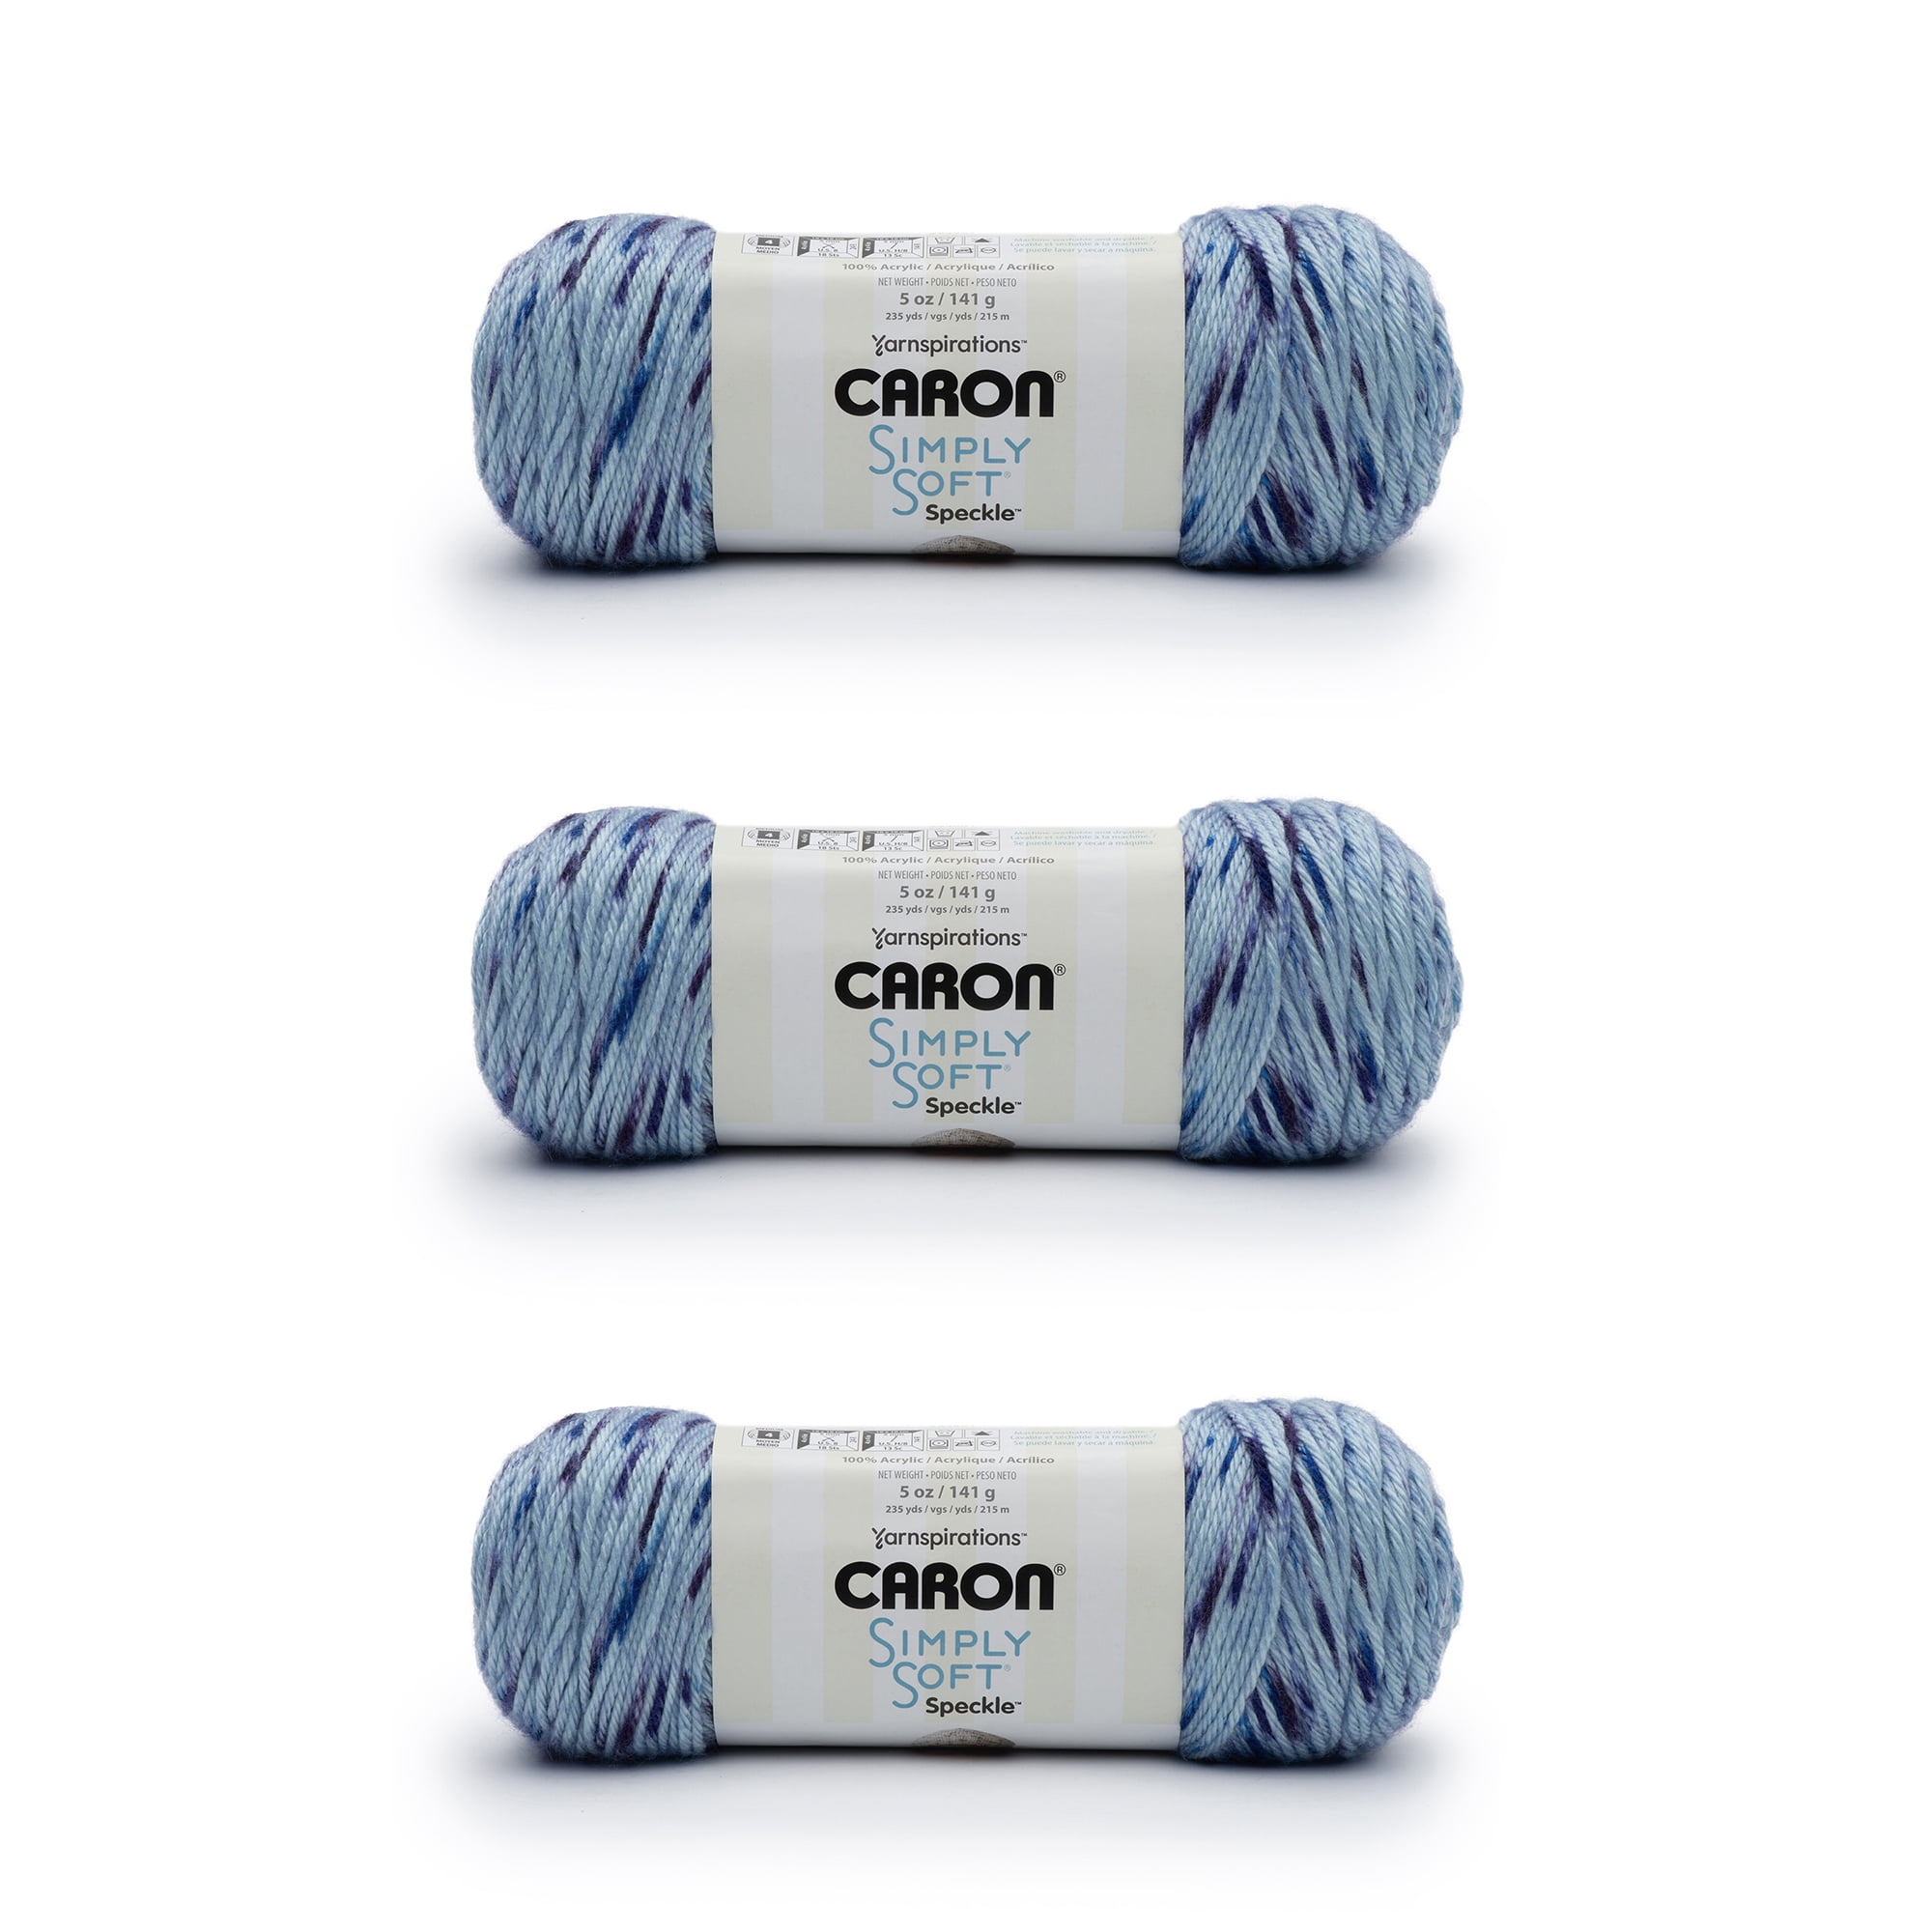 1 Caron Simply Soft Speckle-Pack of 3 Balls-141g Each Balls-Abyss 